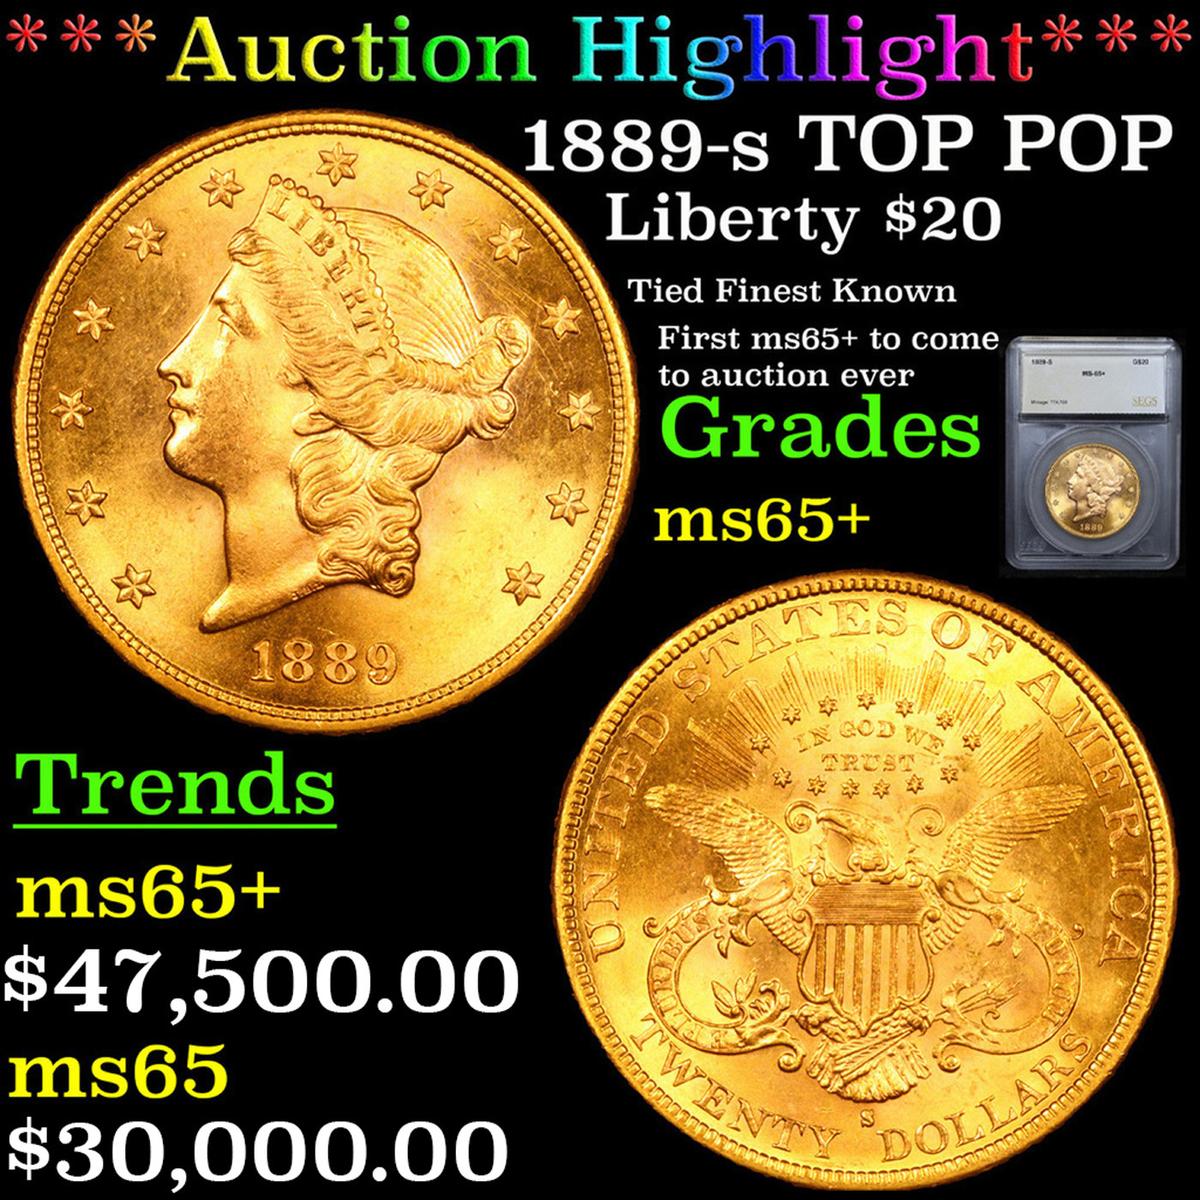 ***Auction Highlight*** 1889-s Gold Liberty Double Eagle TOP POP! $20 Graded ms65+ By SEGS (fc)